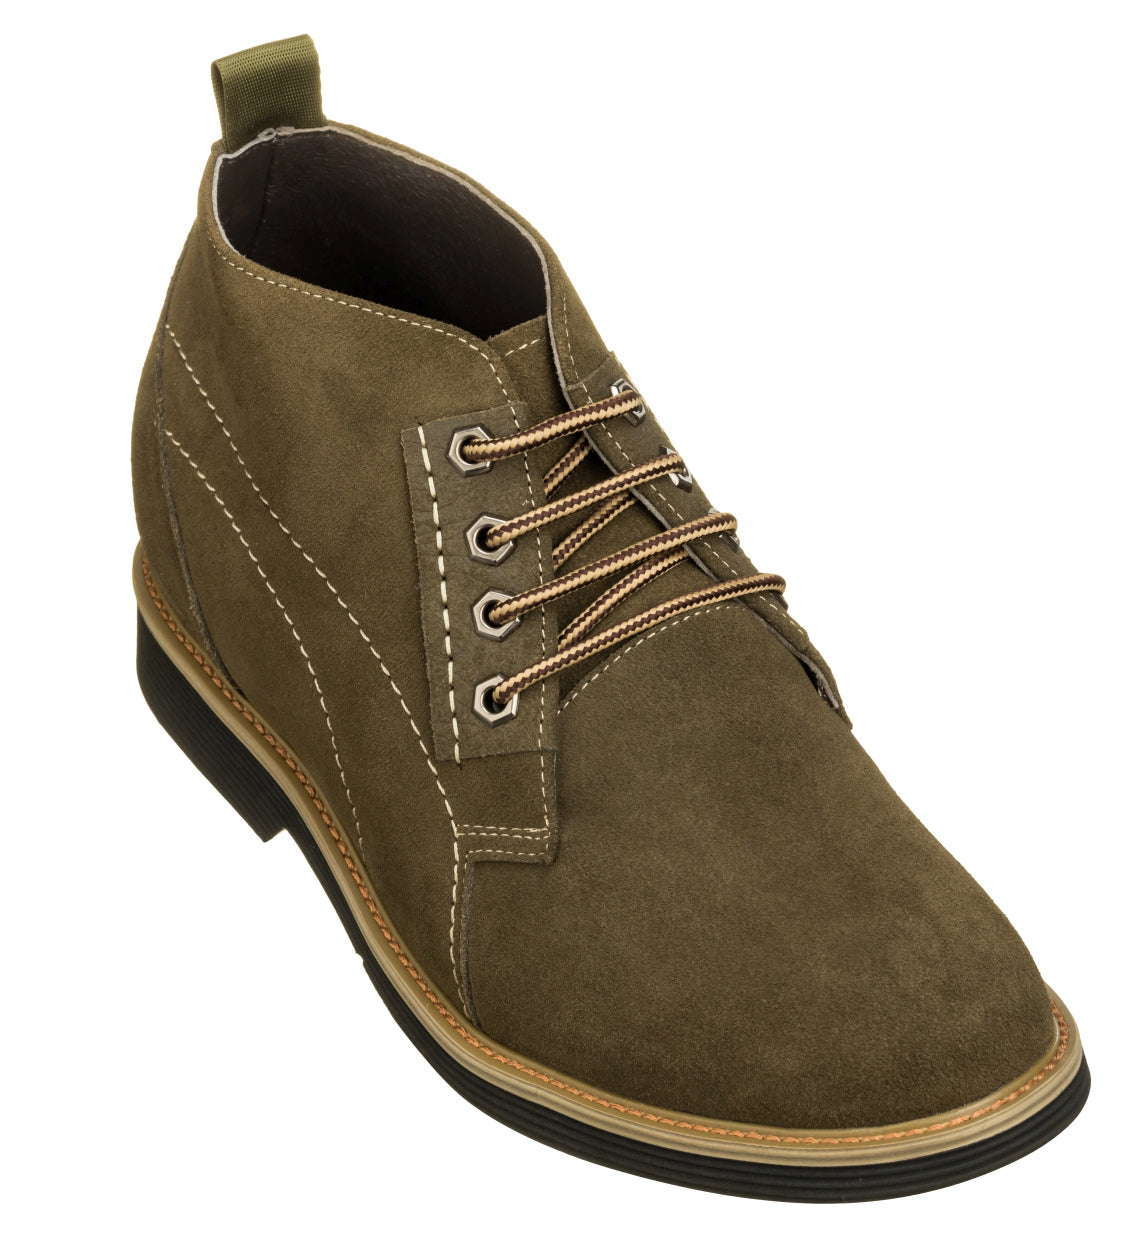 Elevator shoes height increase CALTO - K9912 - 3.2 Inches Taller (Olive)